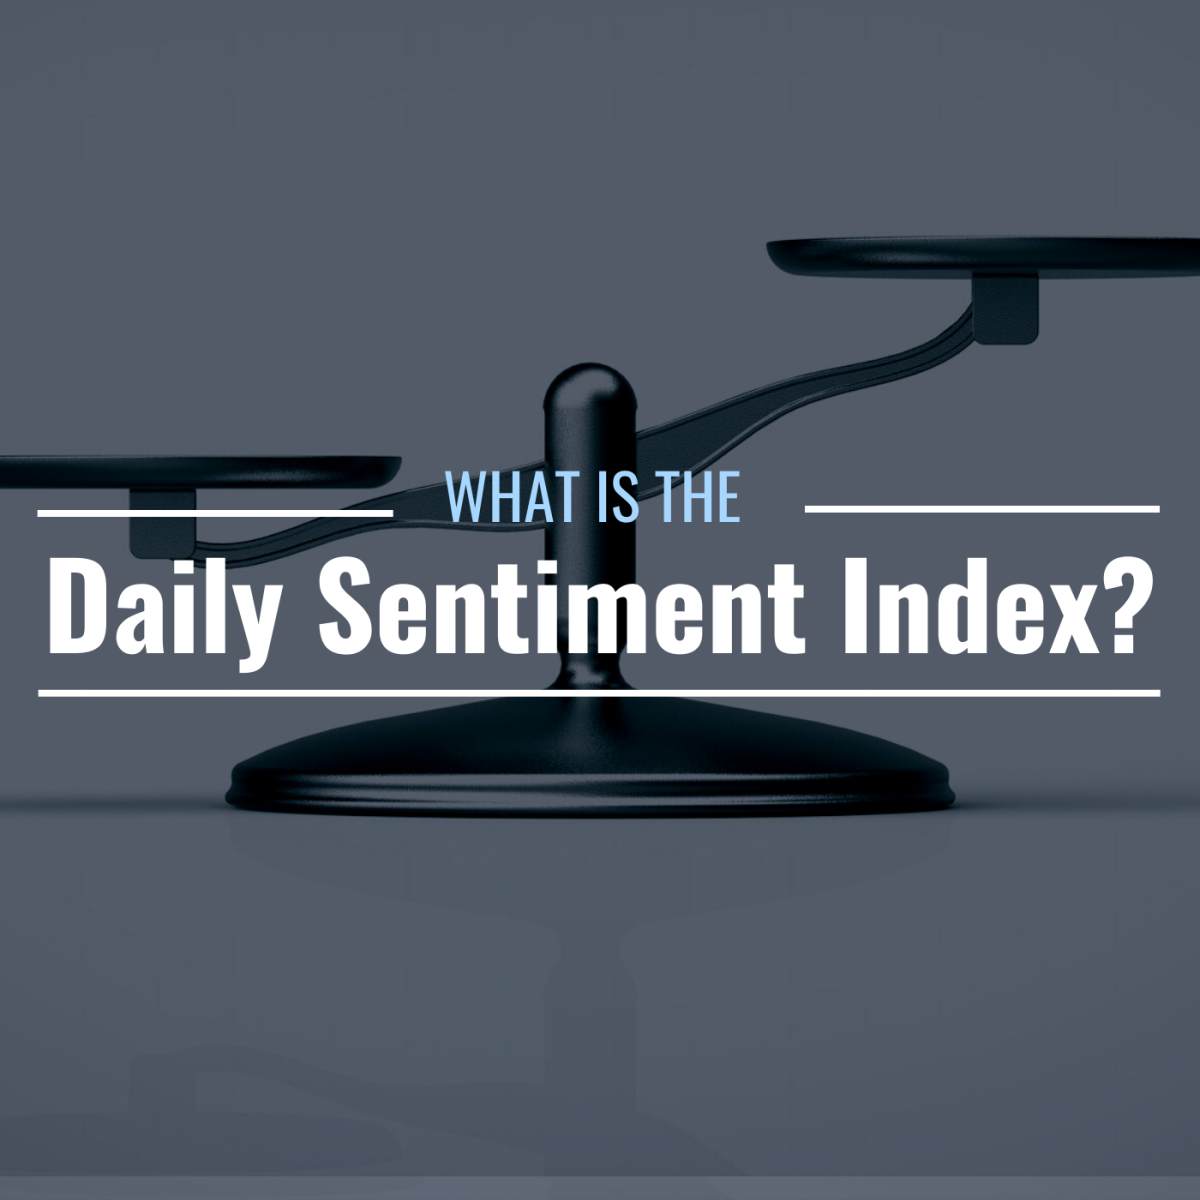 Image of a scale with text overlay "What Is the Daily Sentiment Index"